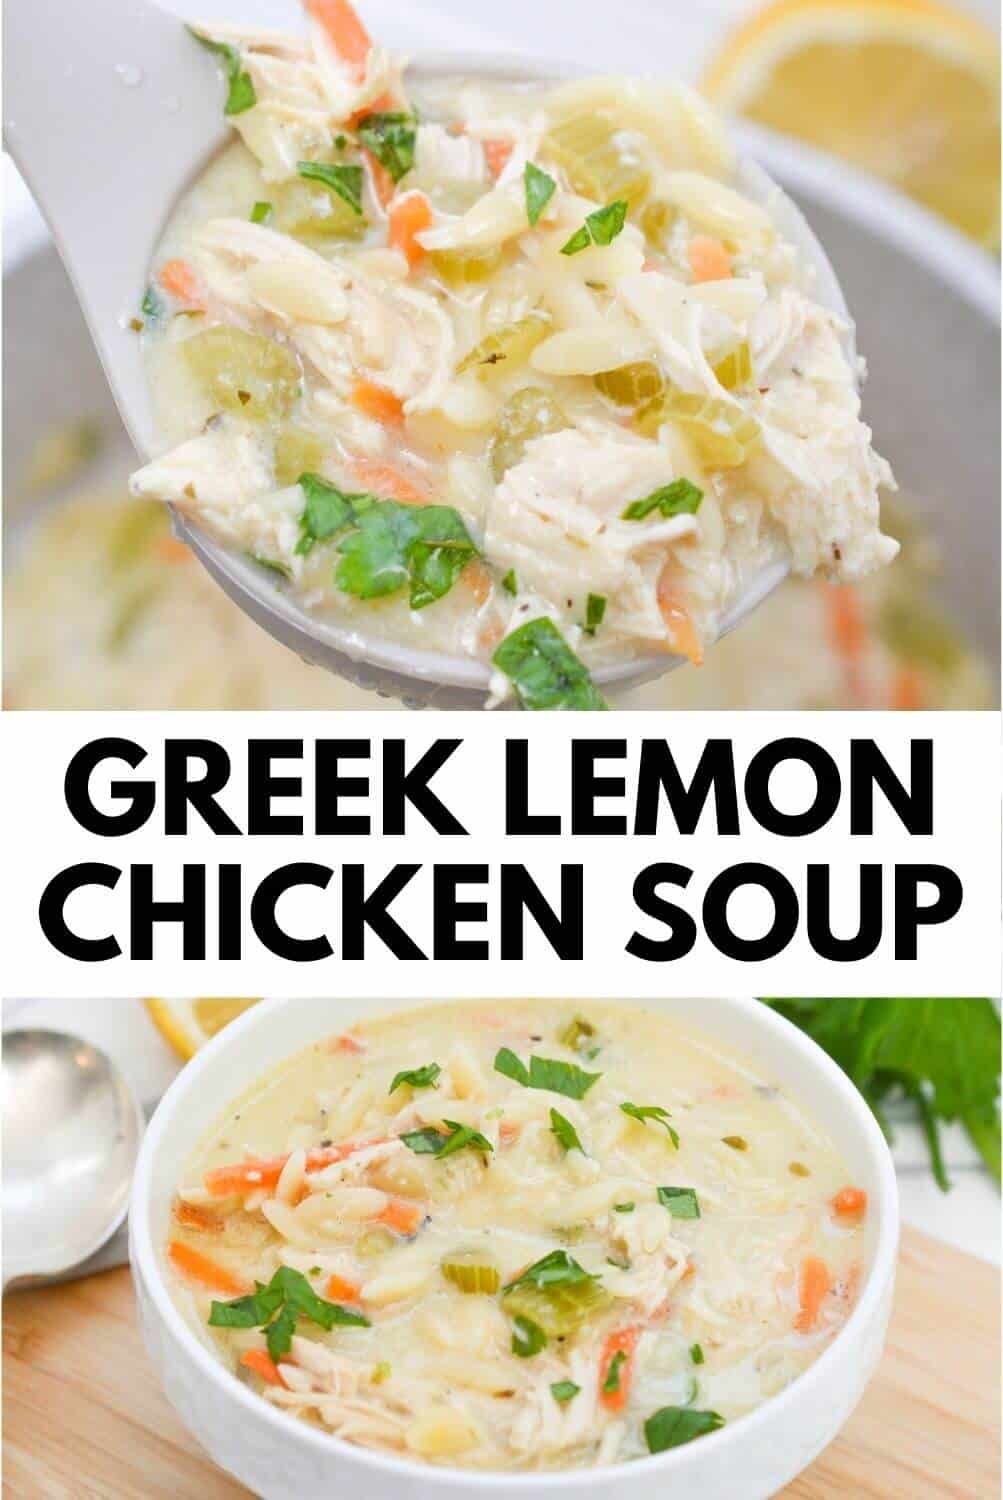 Greek lemon chicken soup with a spoon and carrots.